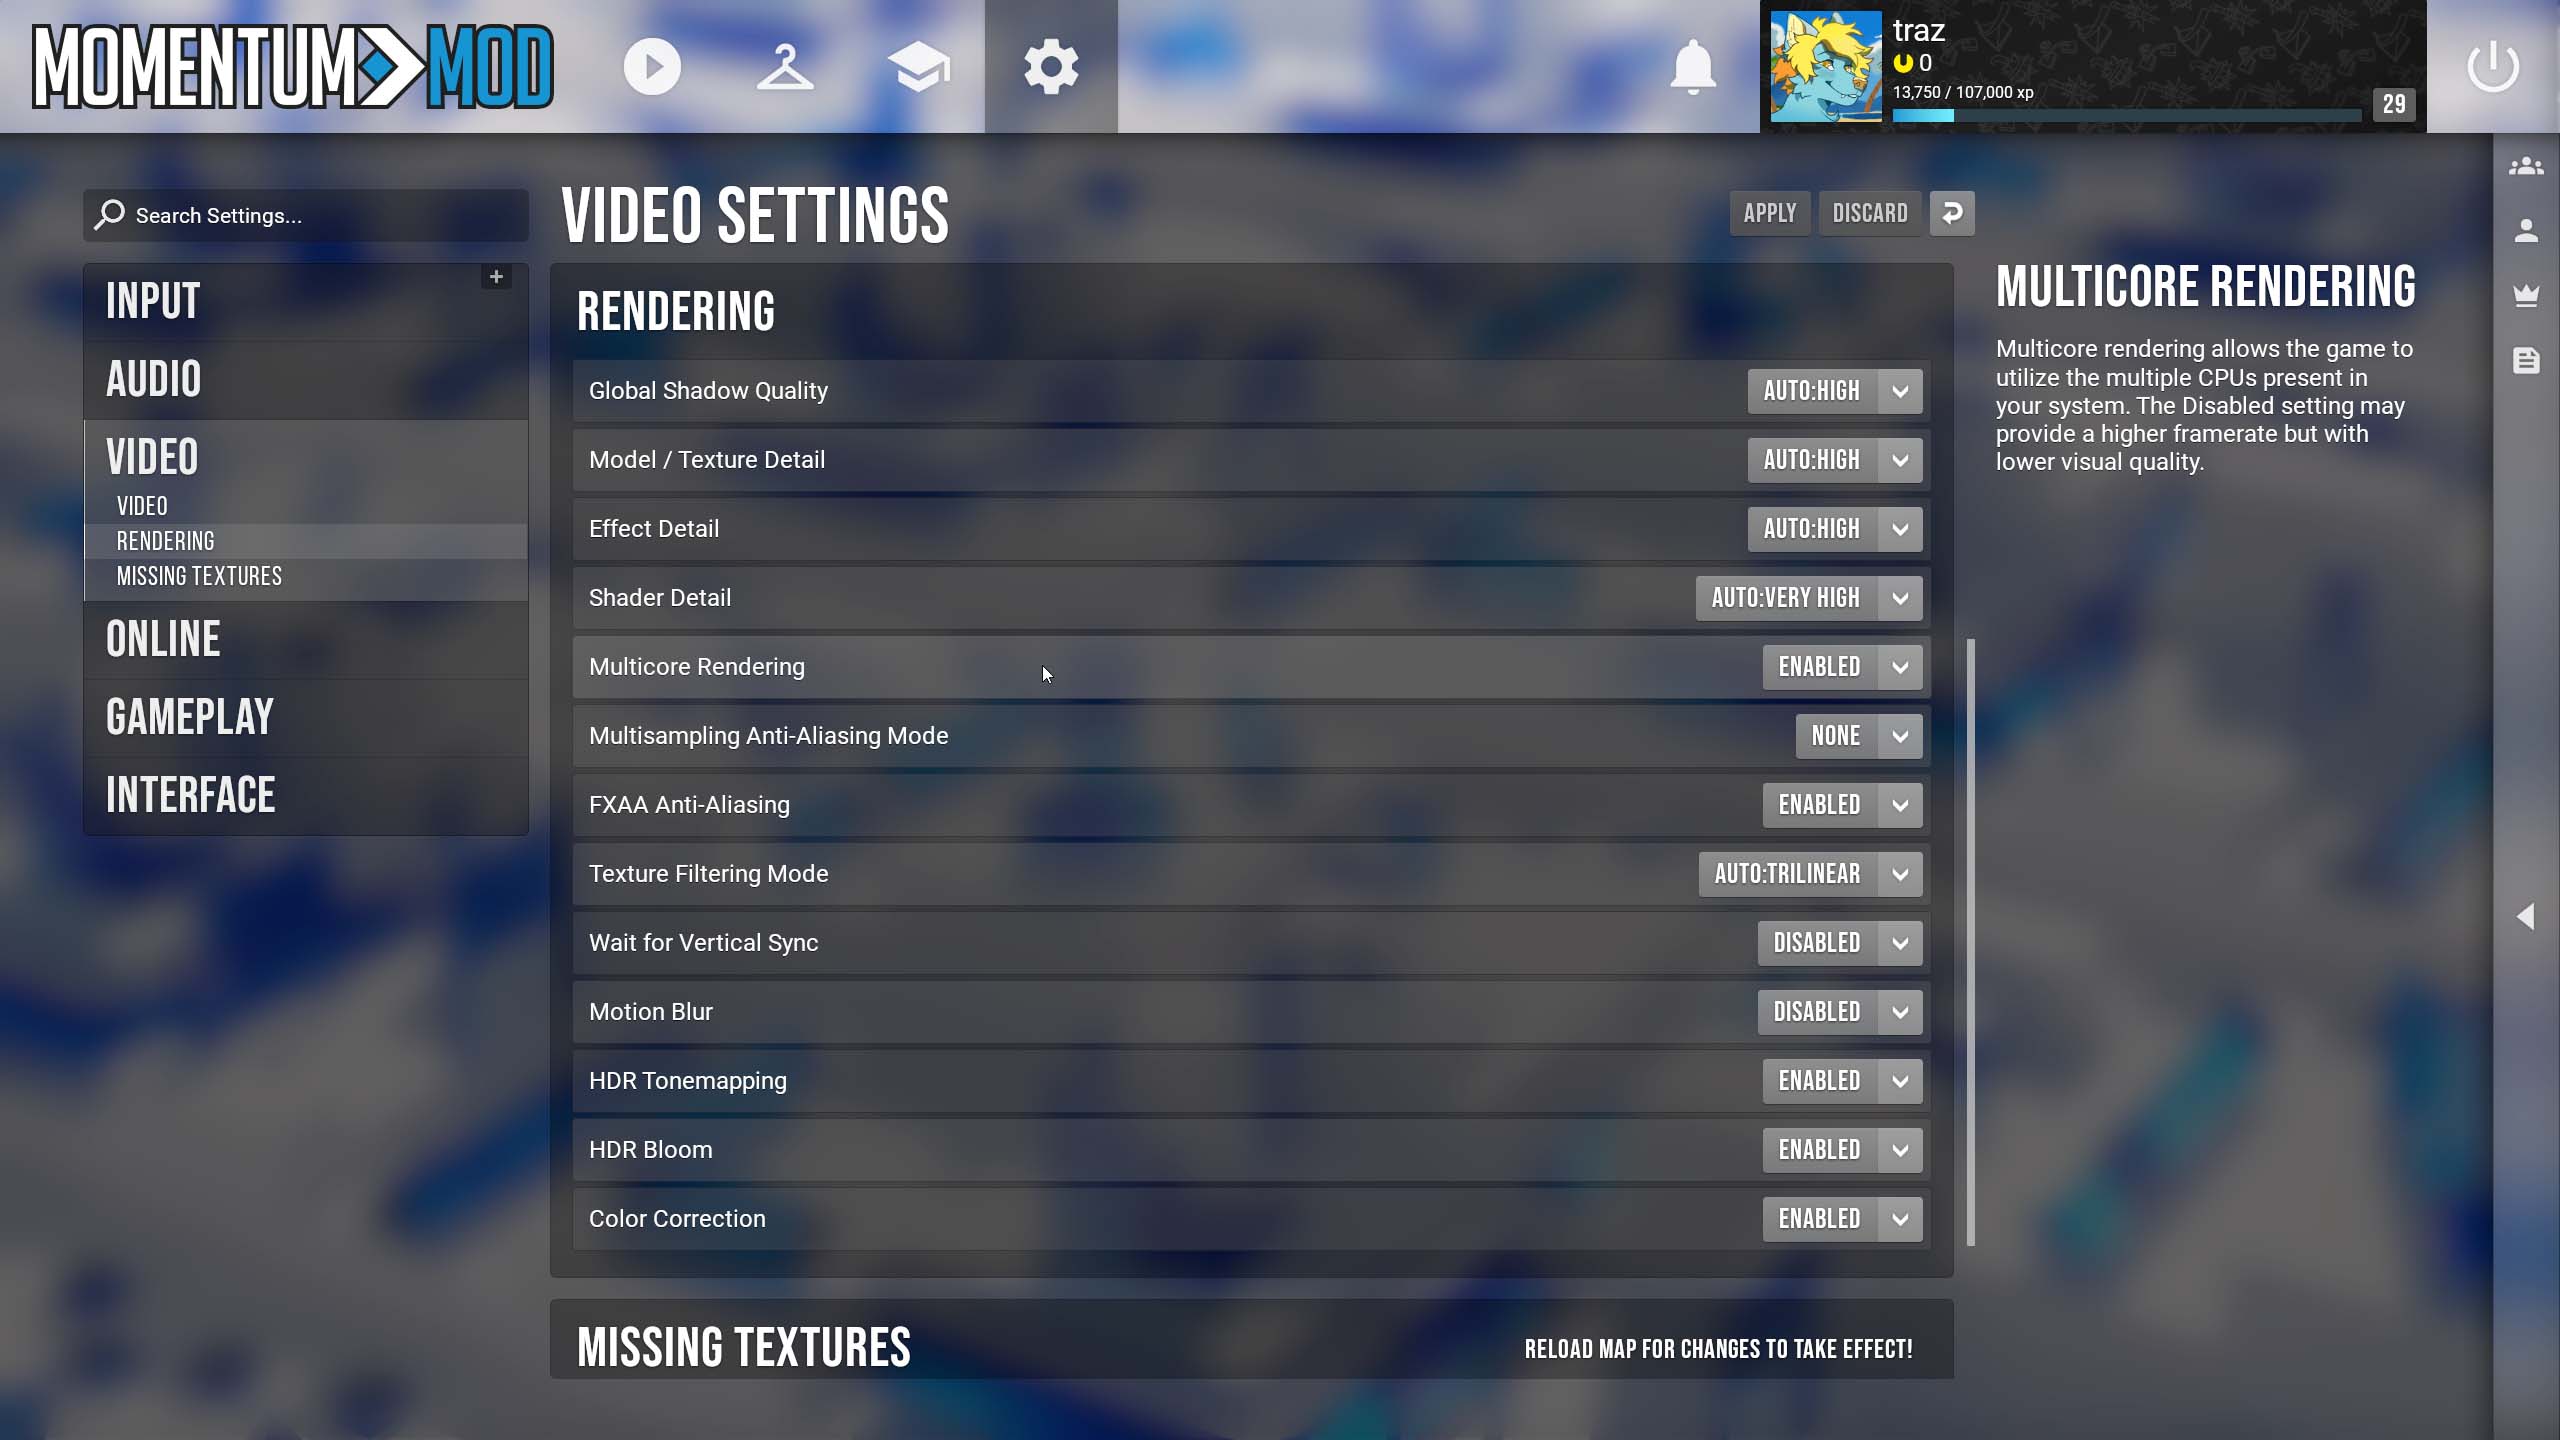 Momentum Mod's new in-game UI displaying the settings